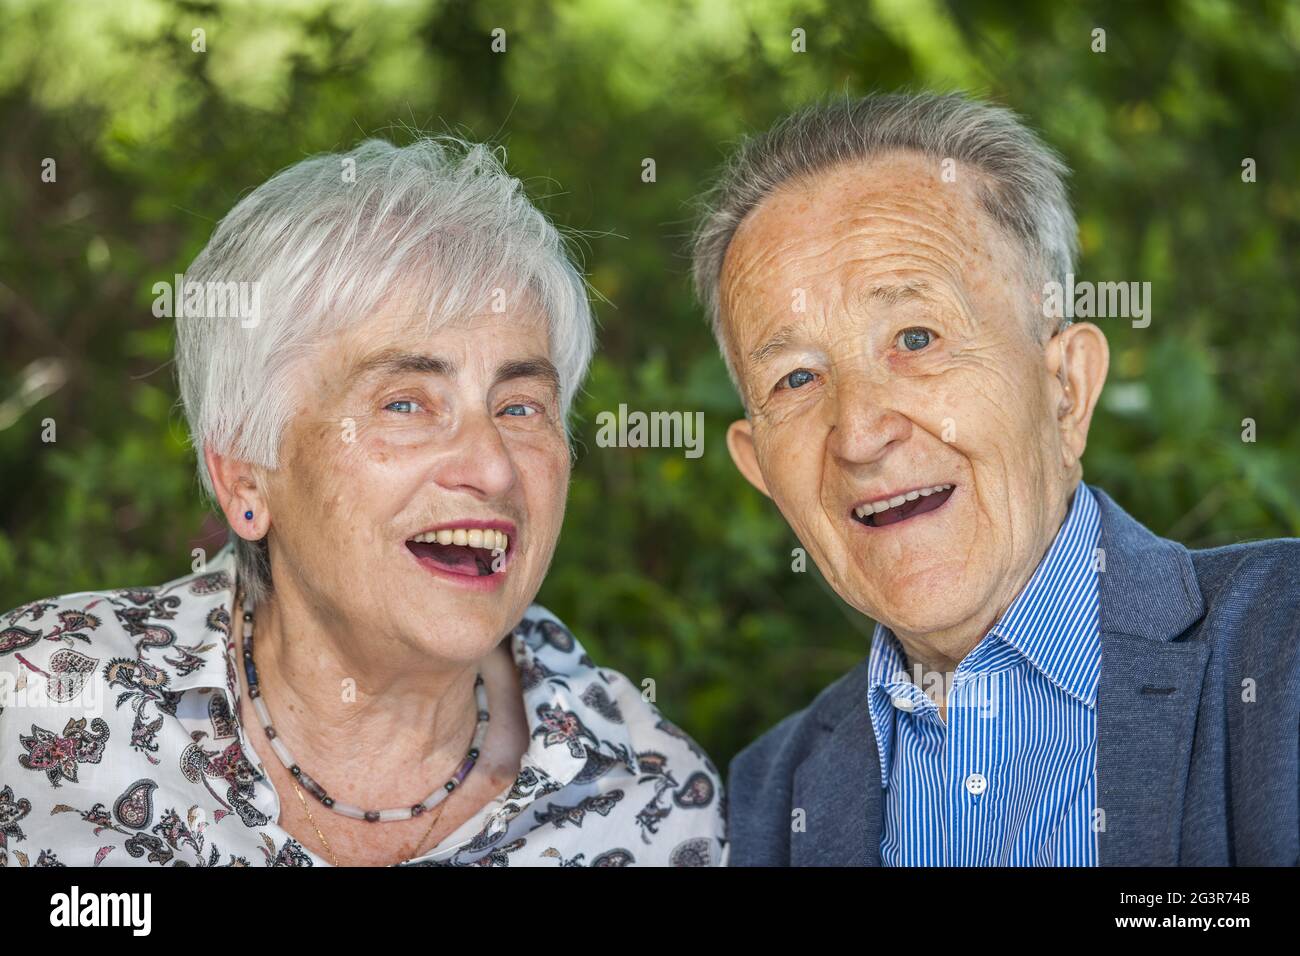 Nice old couple with open laughter Stock Photo